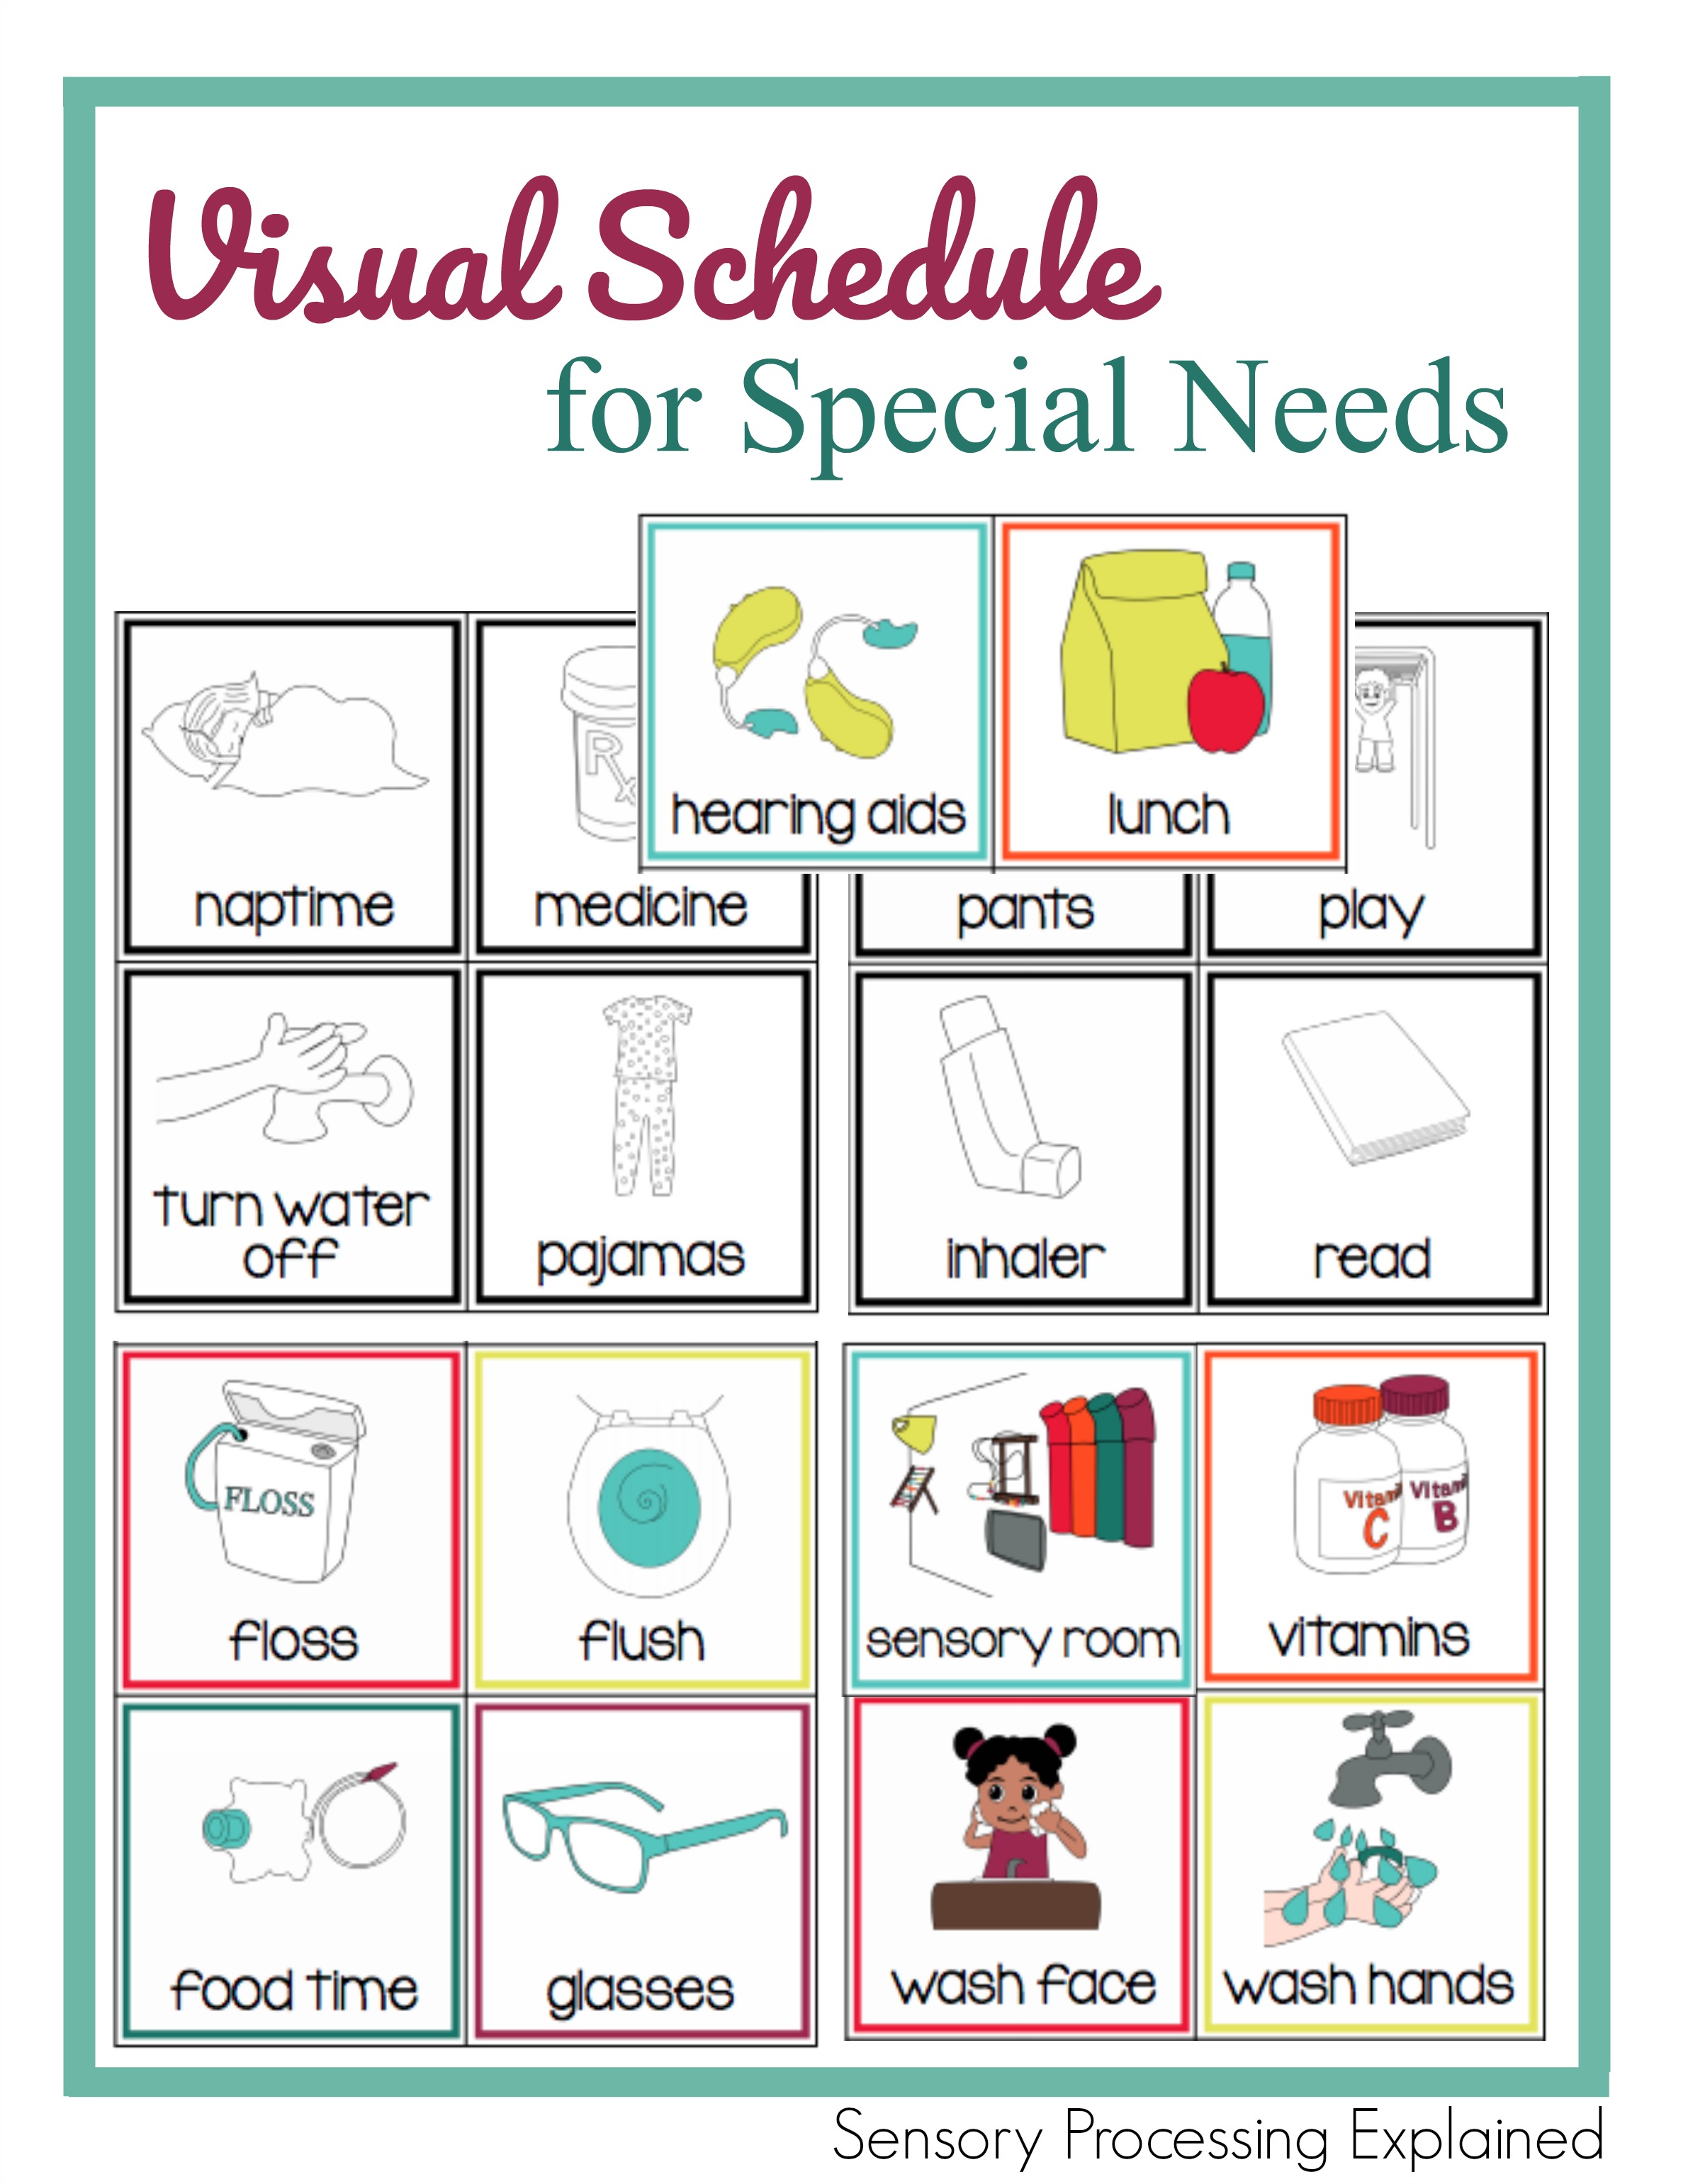 visual-schedule-for-special-needs-digital-download-growing-hands-on